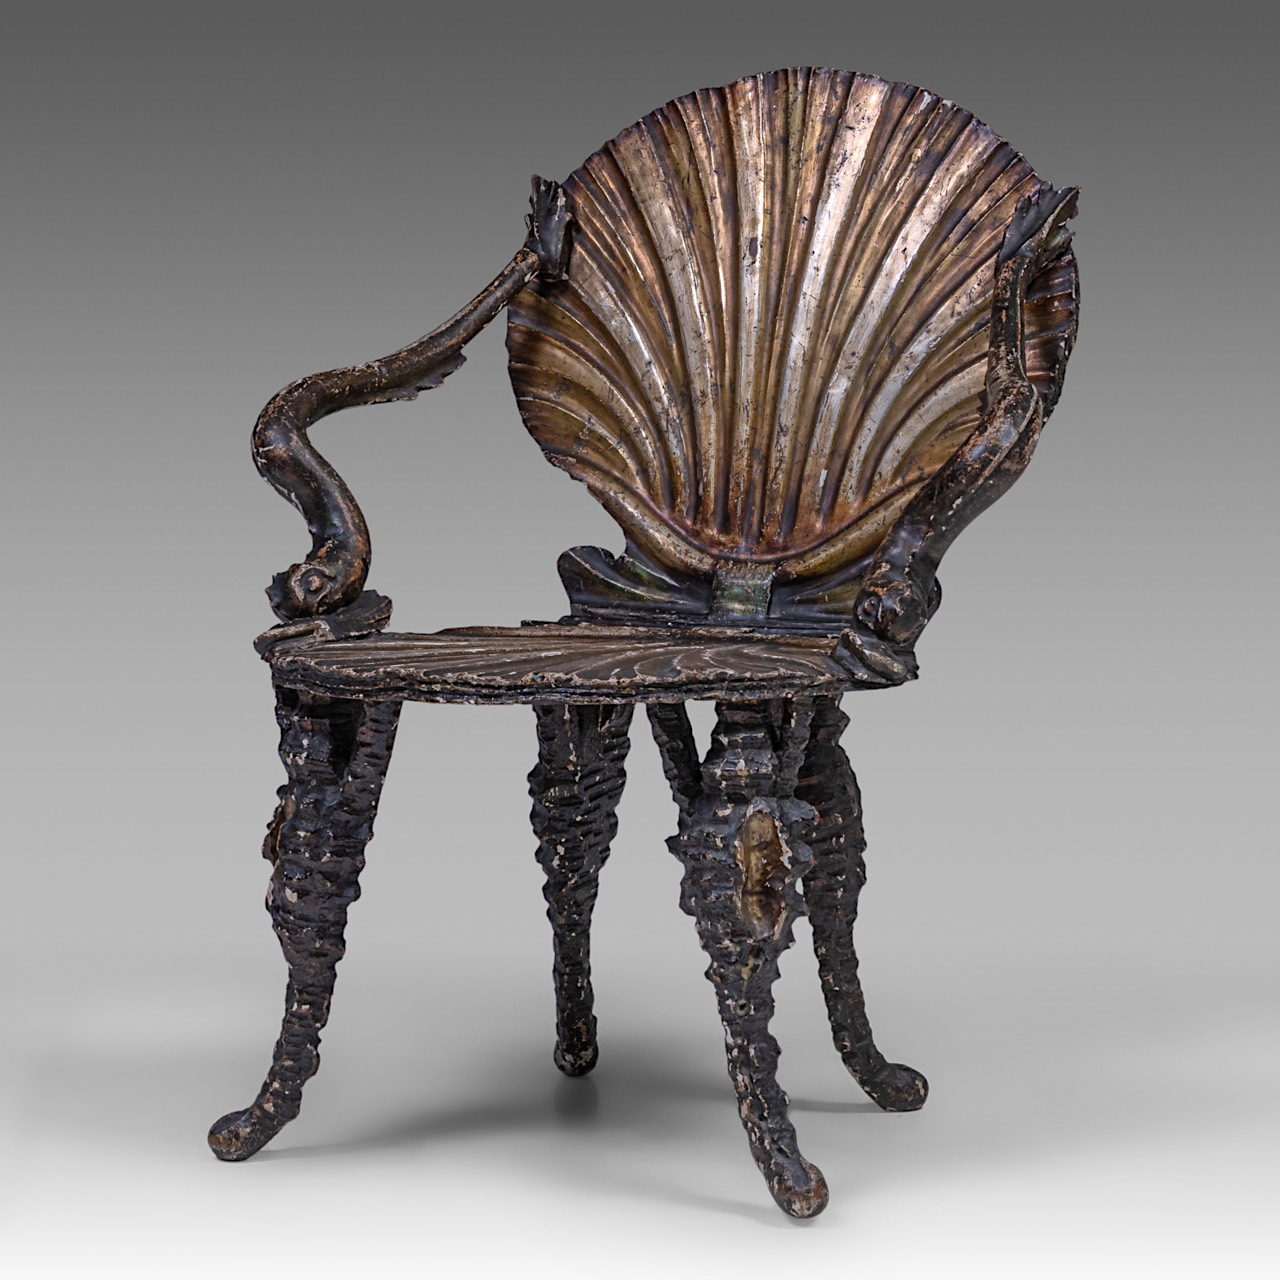 A Venetian 'Grotto' chair, patinated carved wood and stucco, 19thC, H total 84 cm - H seat 40,5 cm - - Image 3 of 8